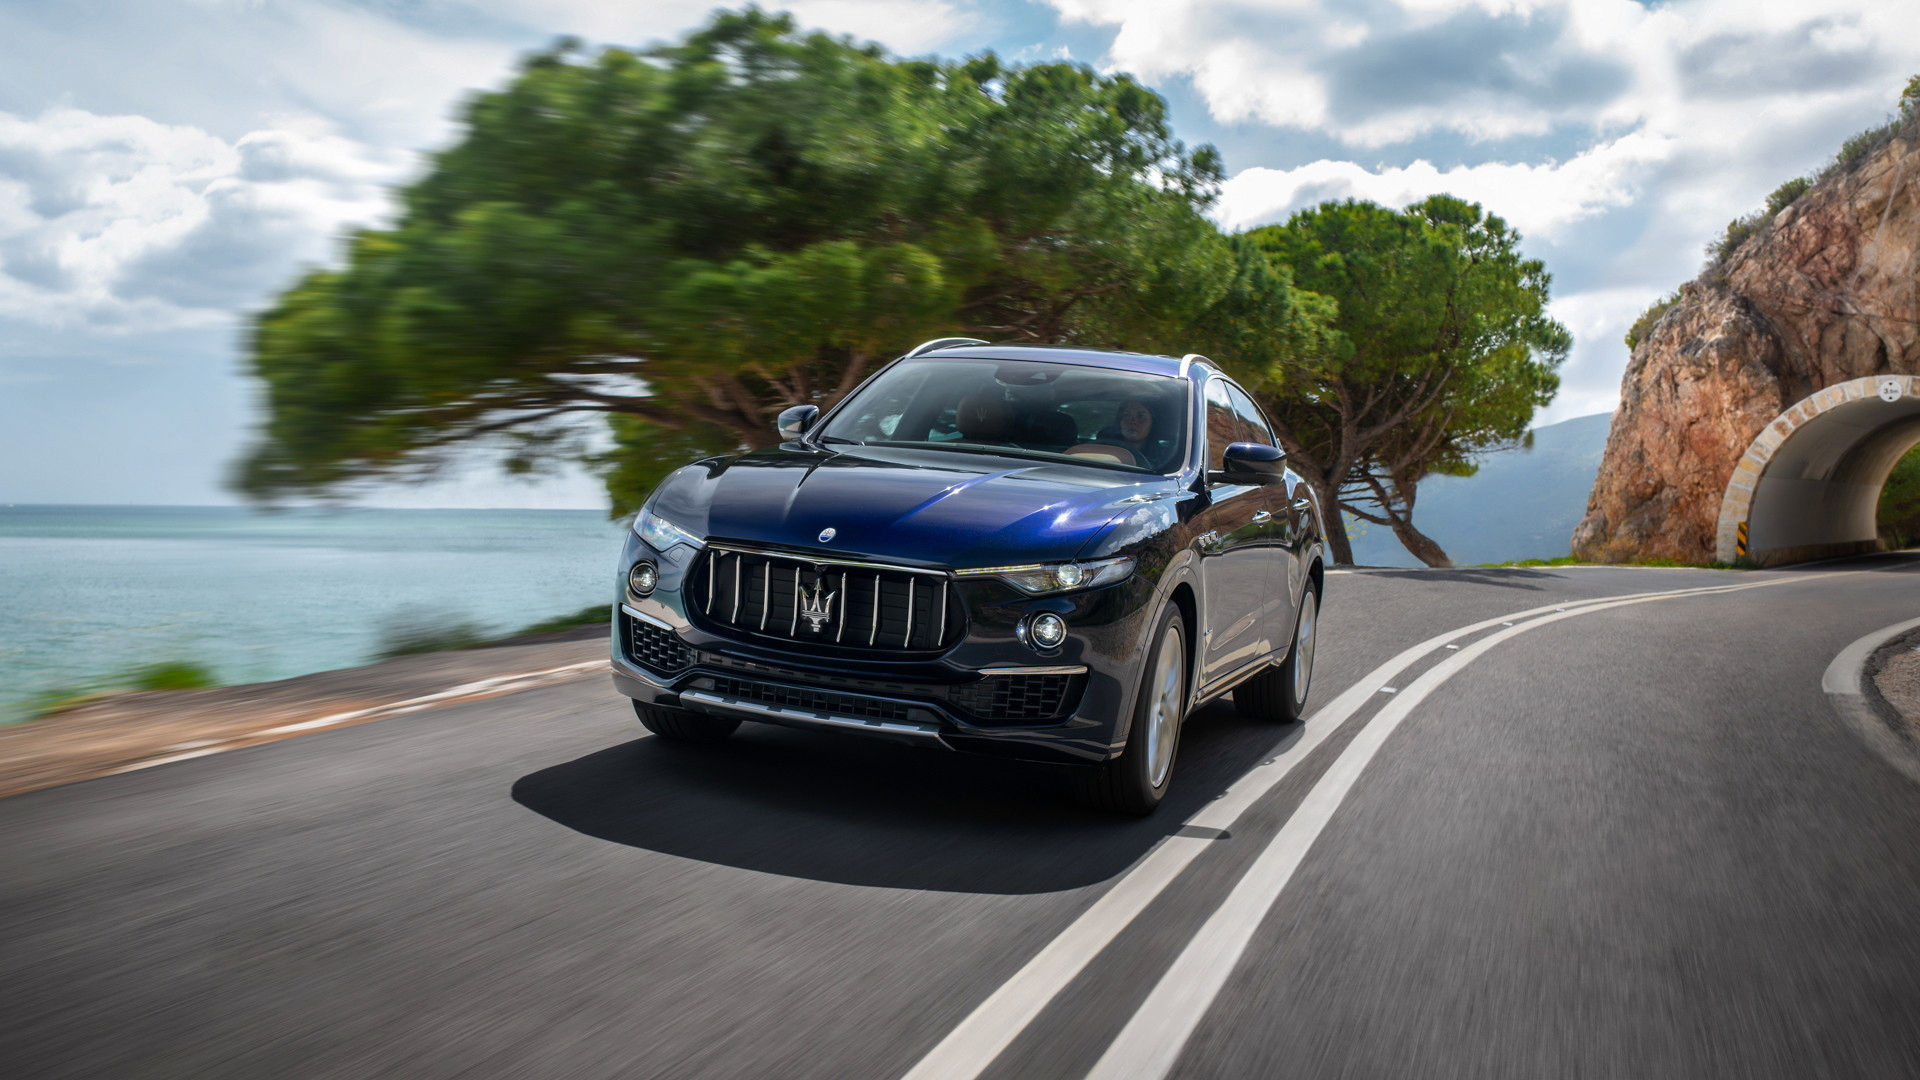 The luxury SUV Maserati Levante 2019 on the road - front view